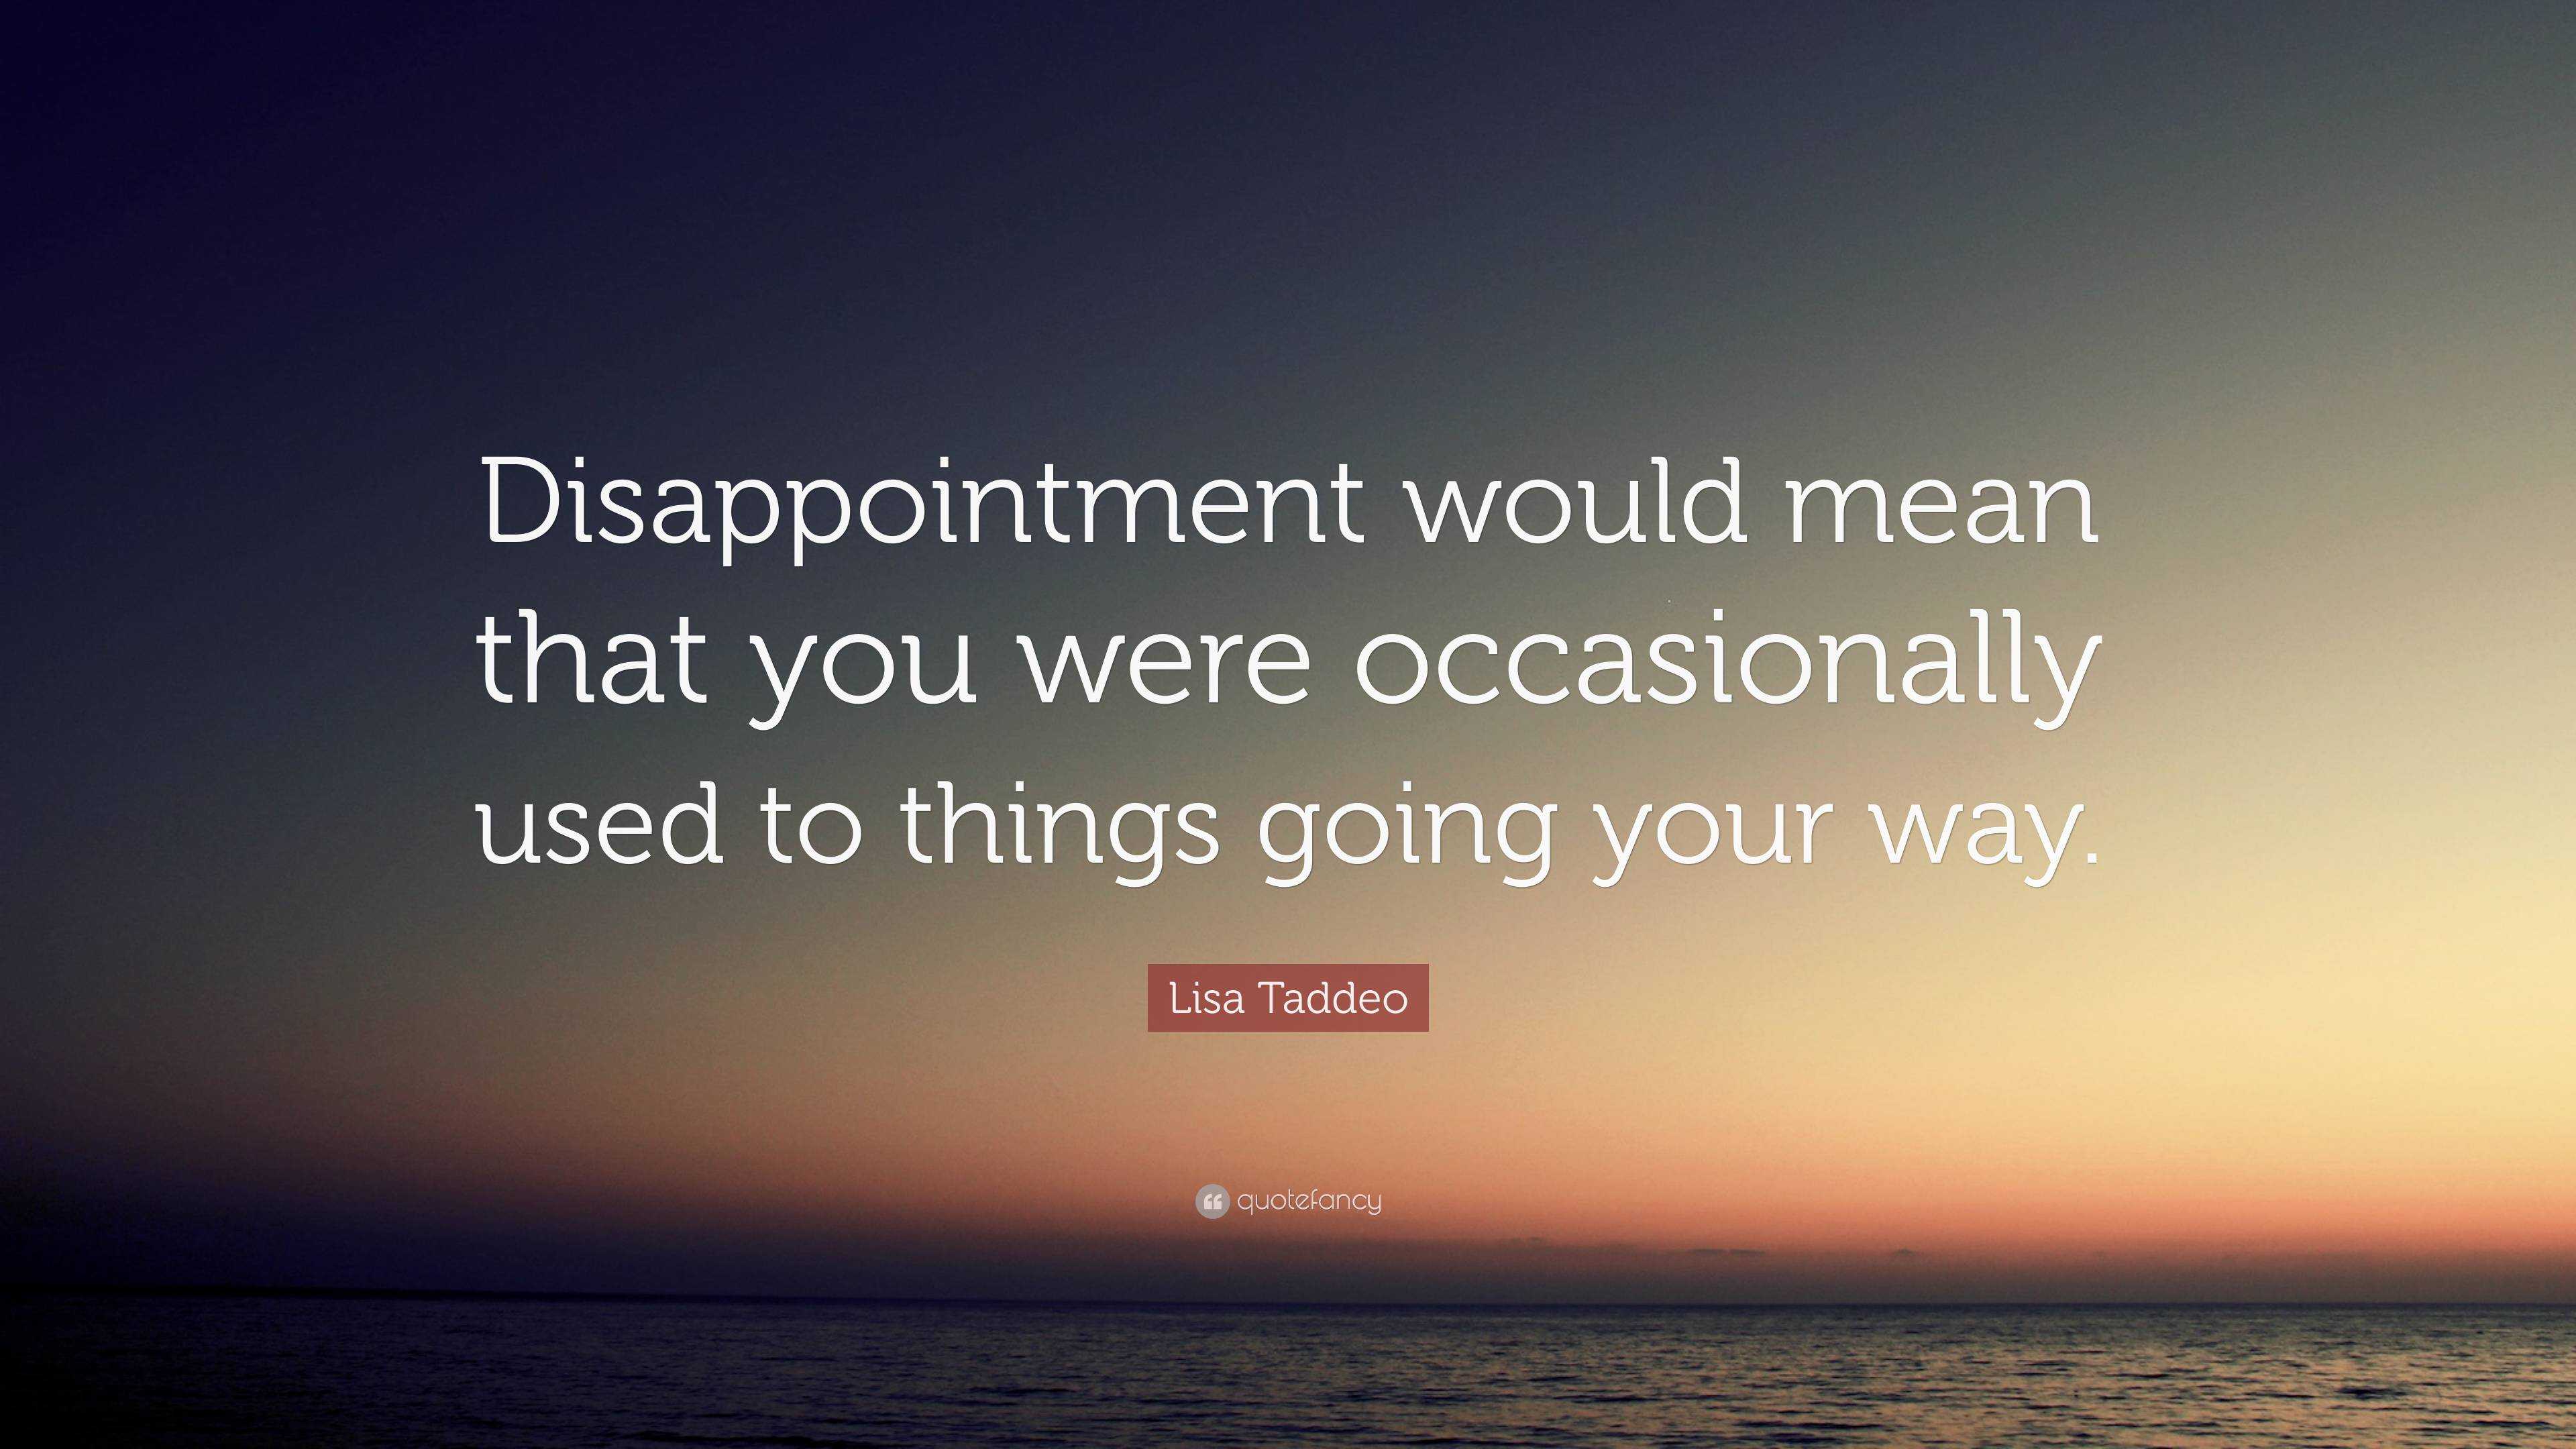 Lisa Taddeo Quote: “Disappointment would mean that you were